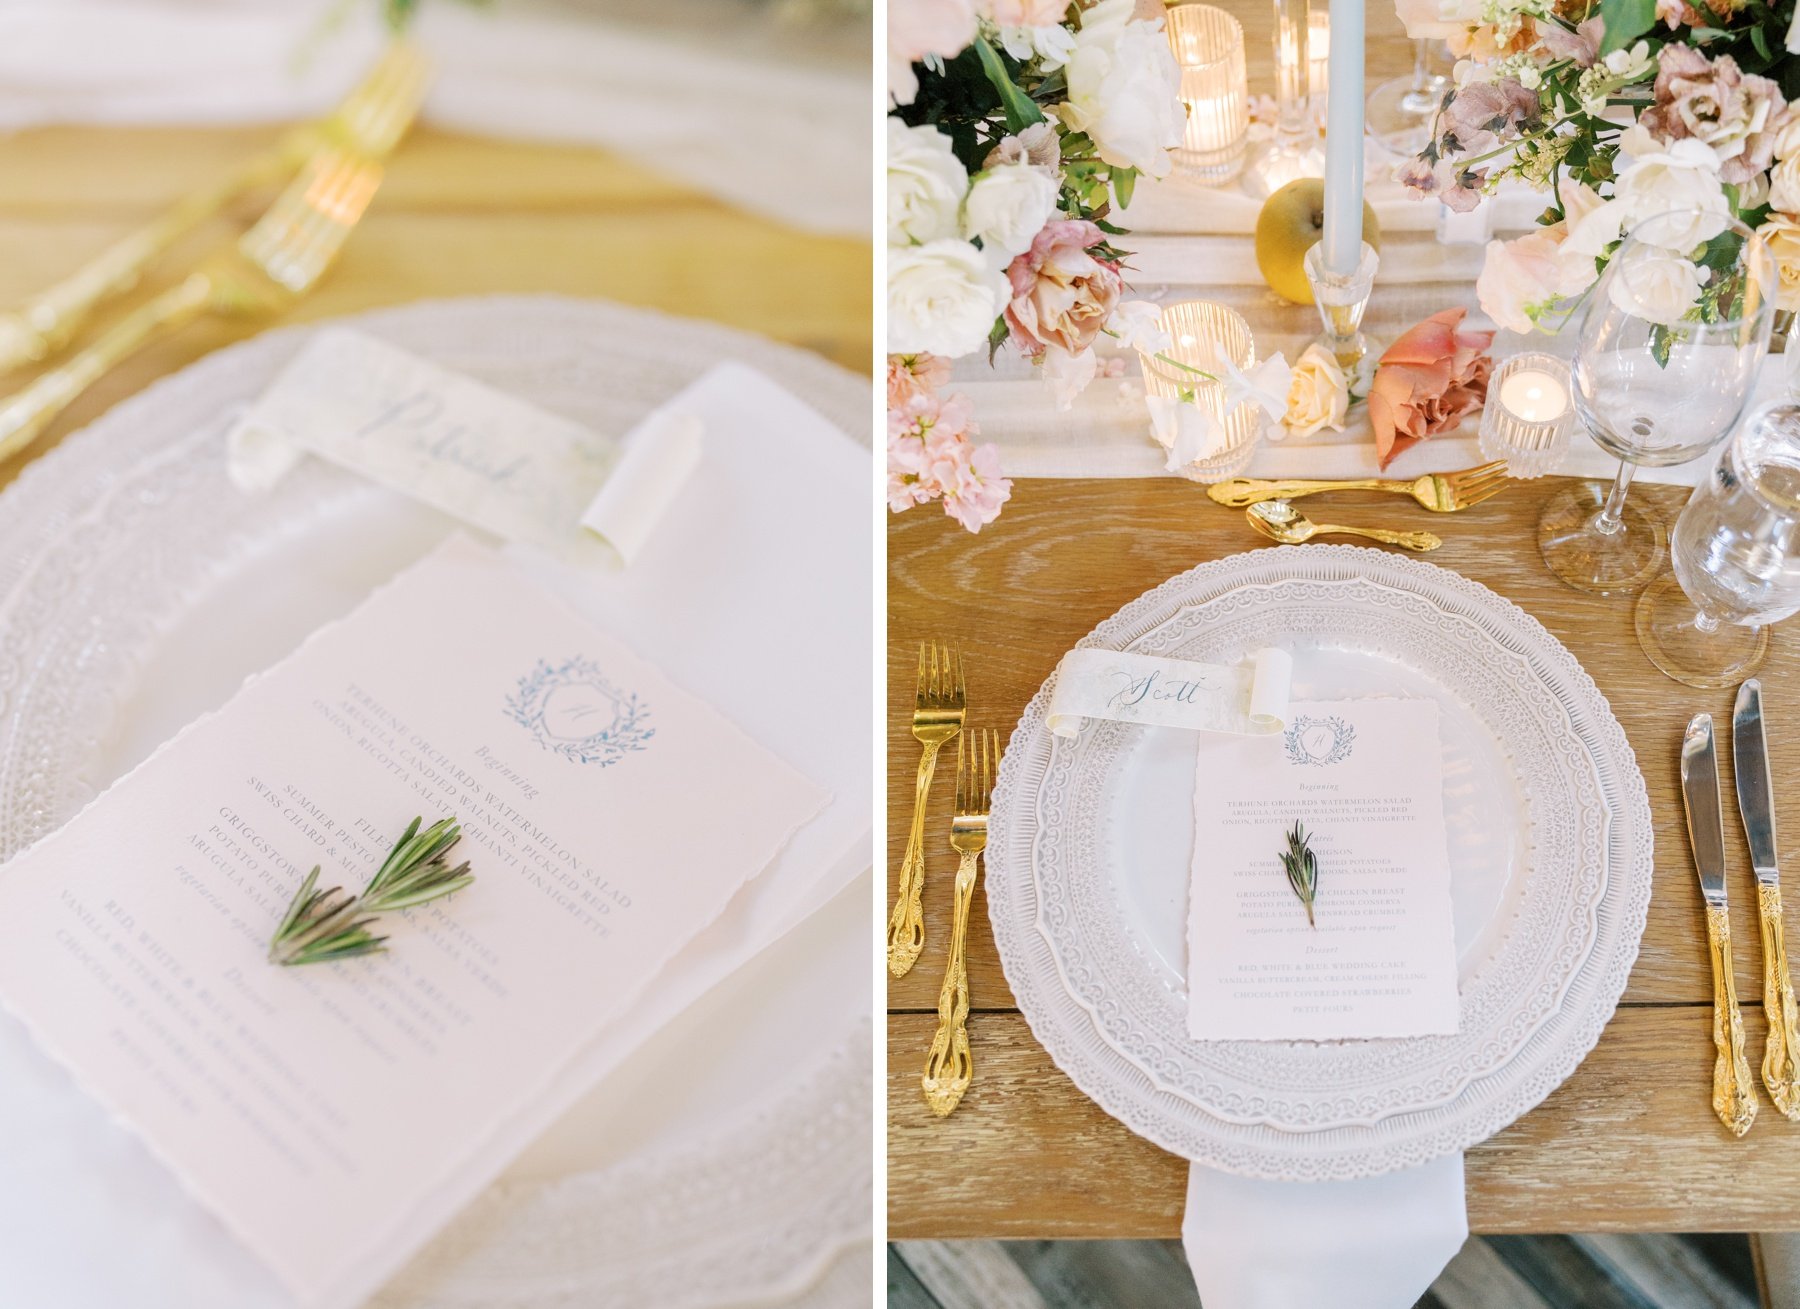 Tablescape with vintage plates, gold cutlery, and pastel taper candles at a French Country wedding reception